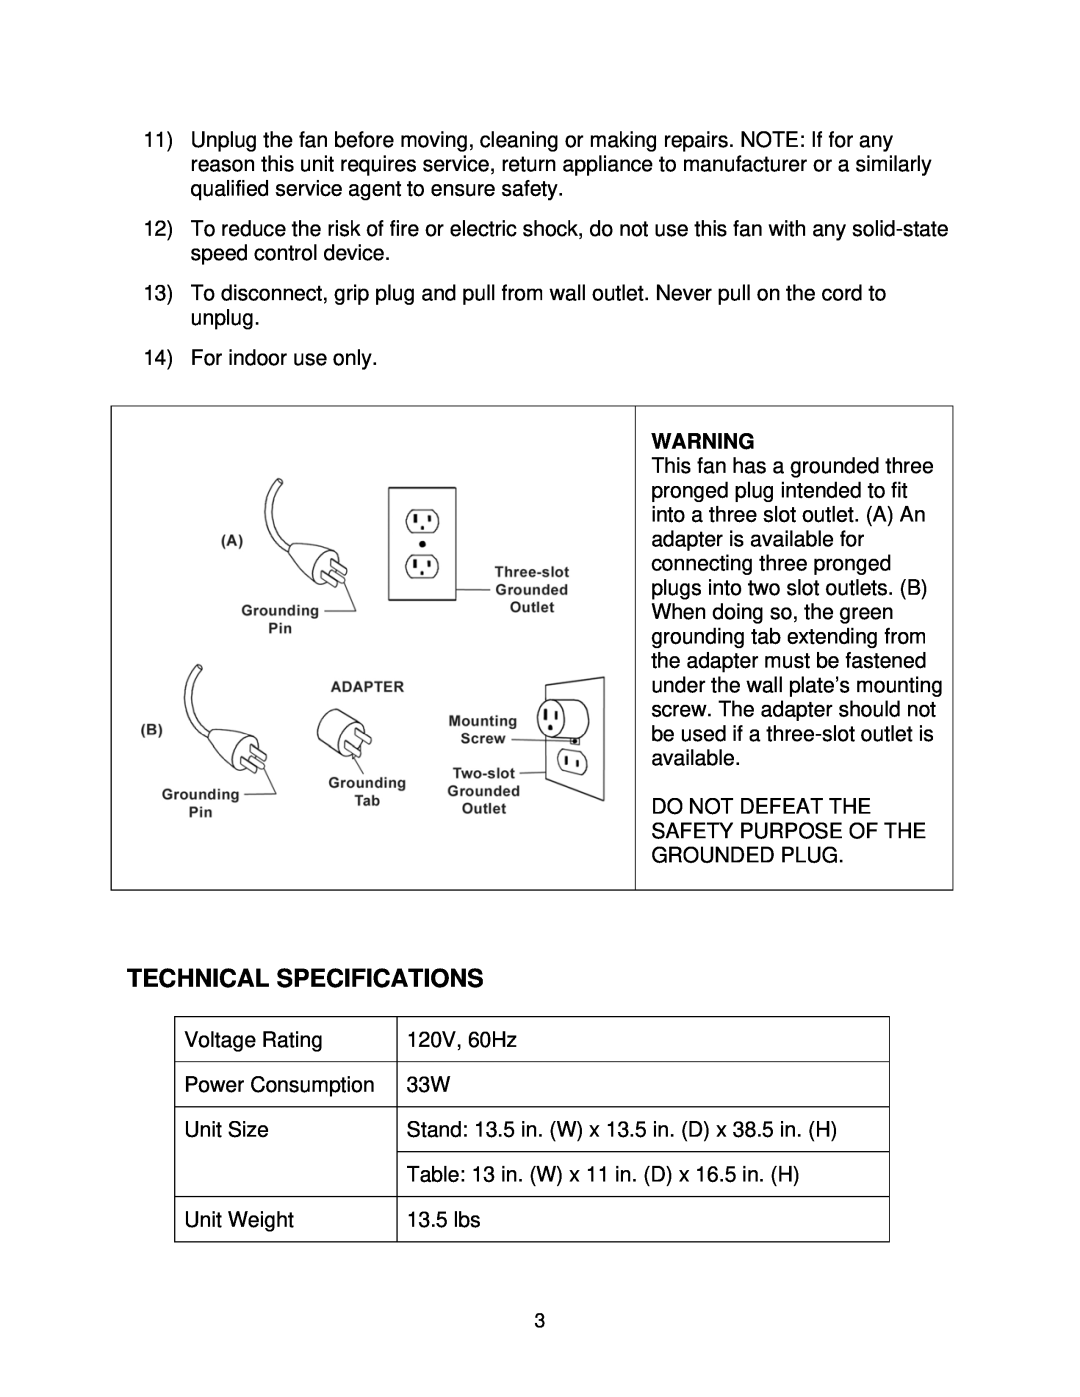 Soleus Air FCM-30 owner manual Technical Specifications 